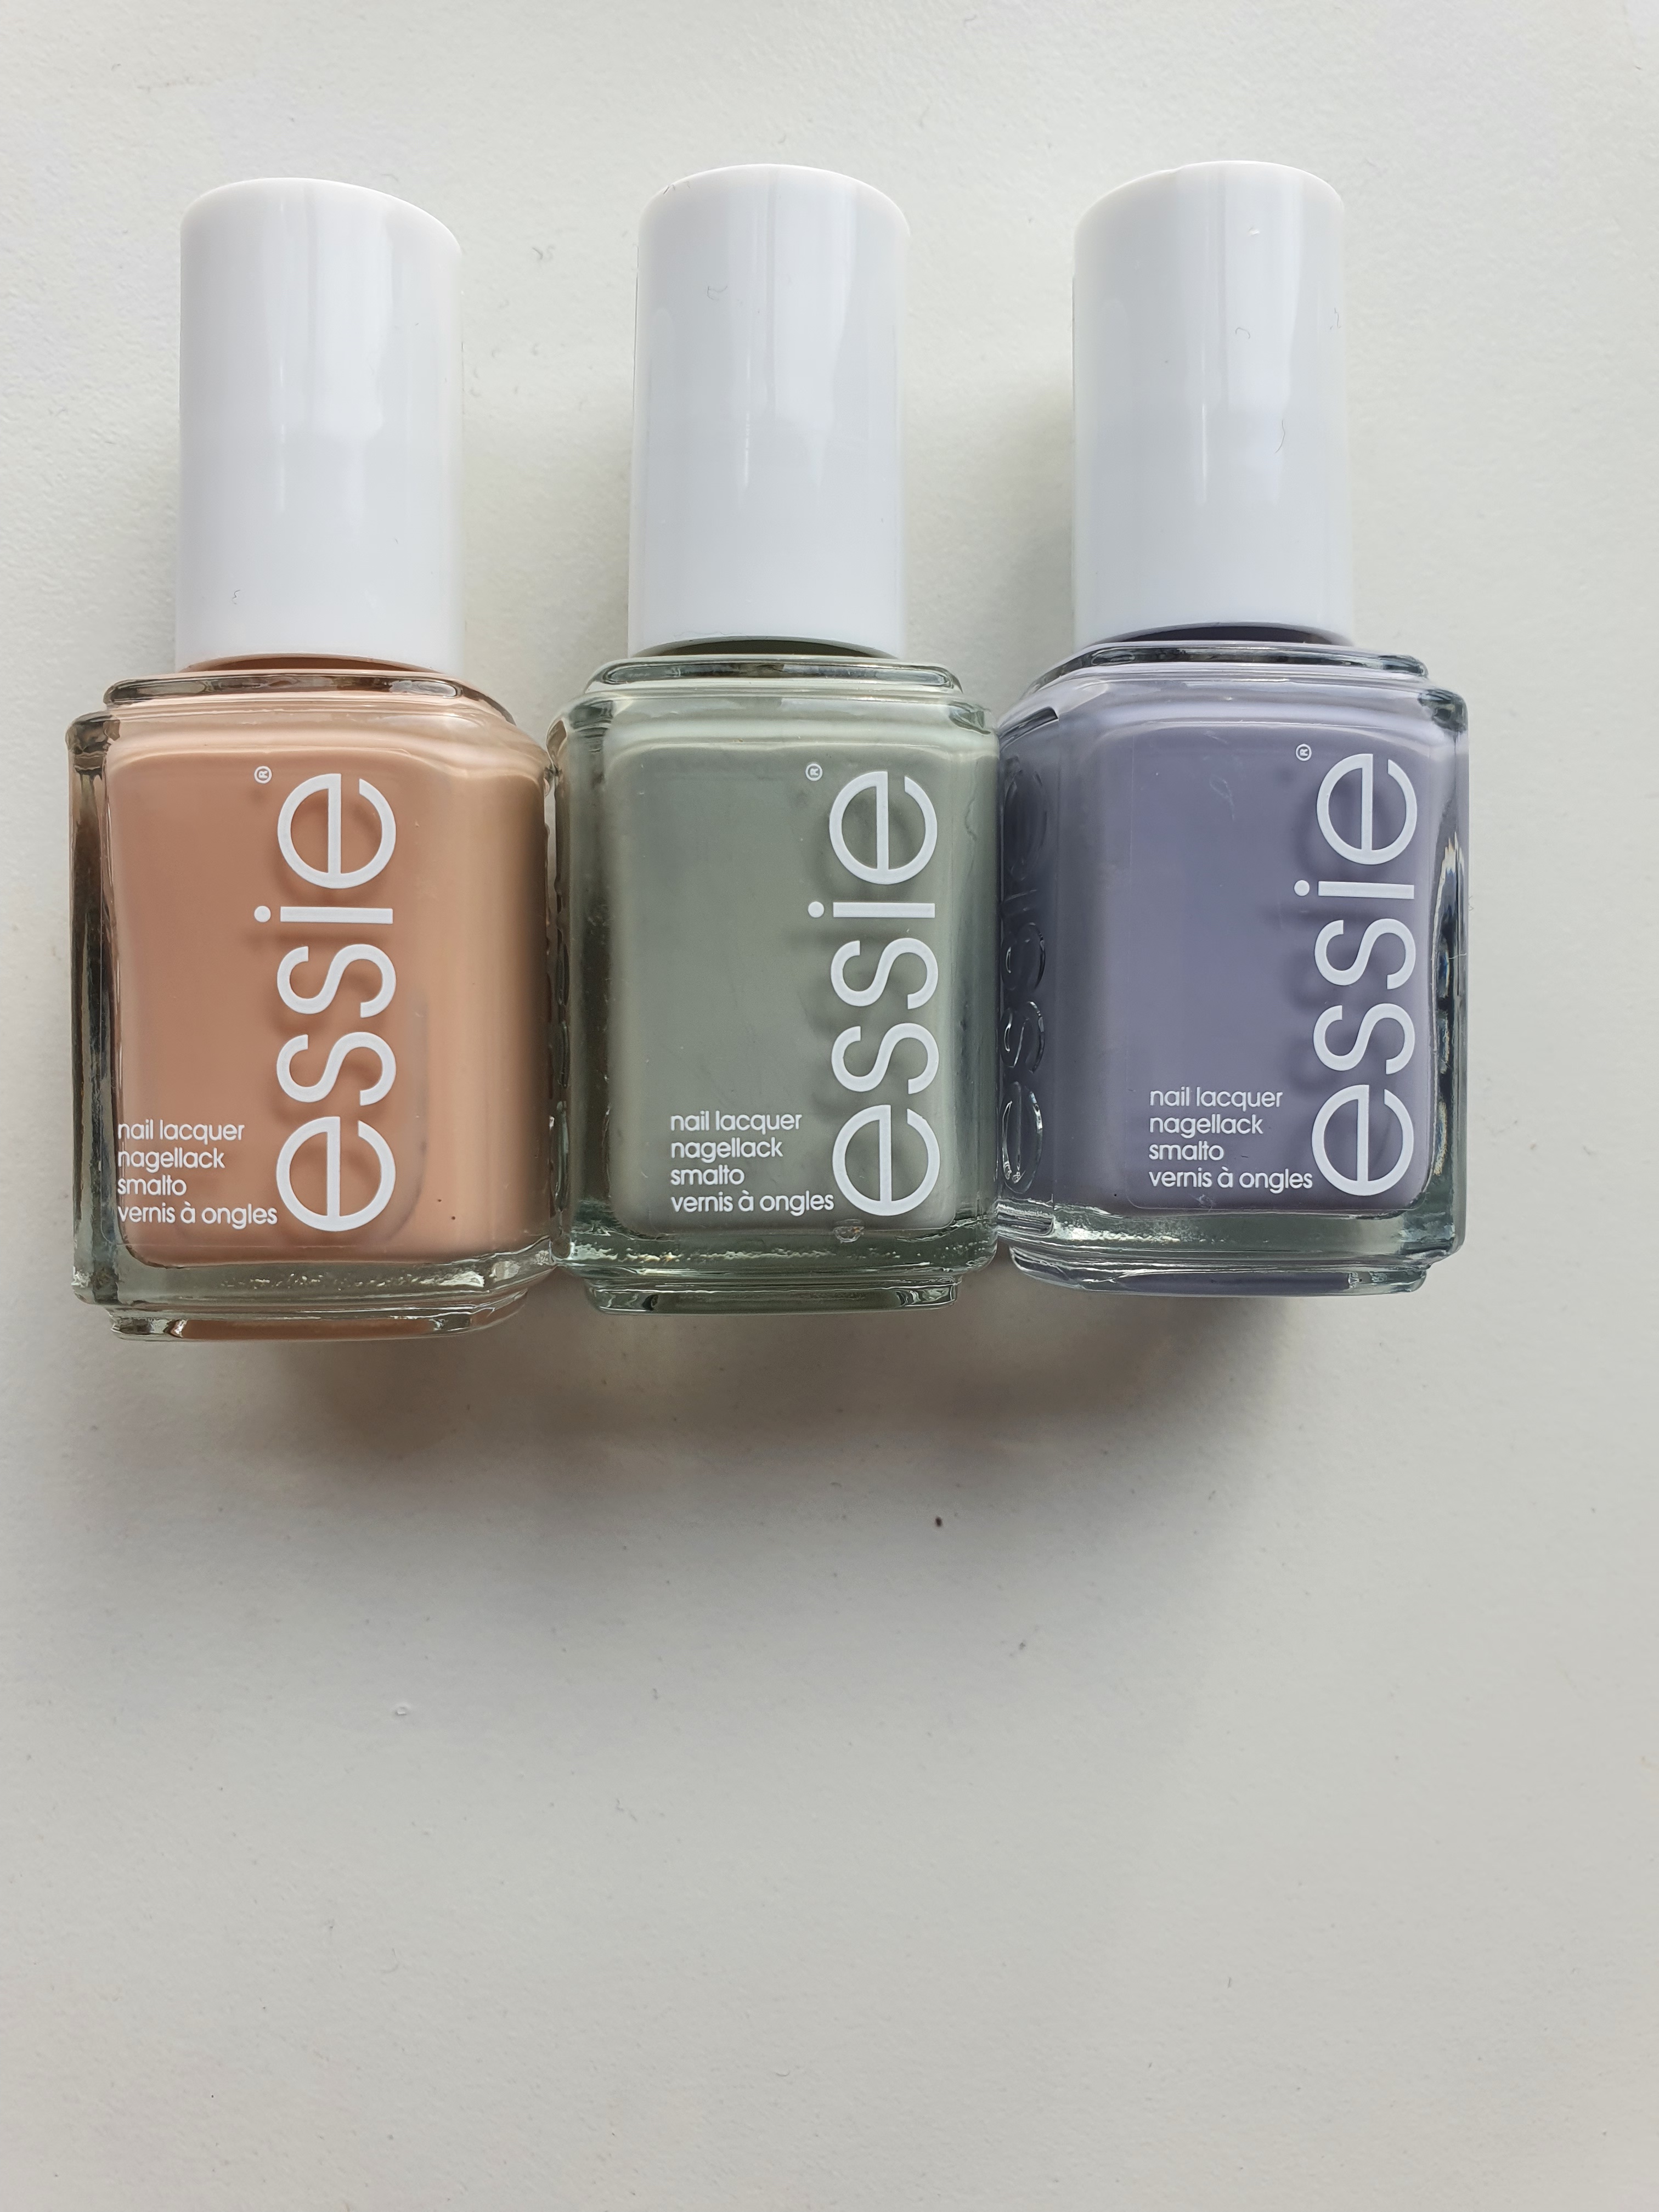 – beleaf Review: in Essie yourself collection